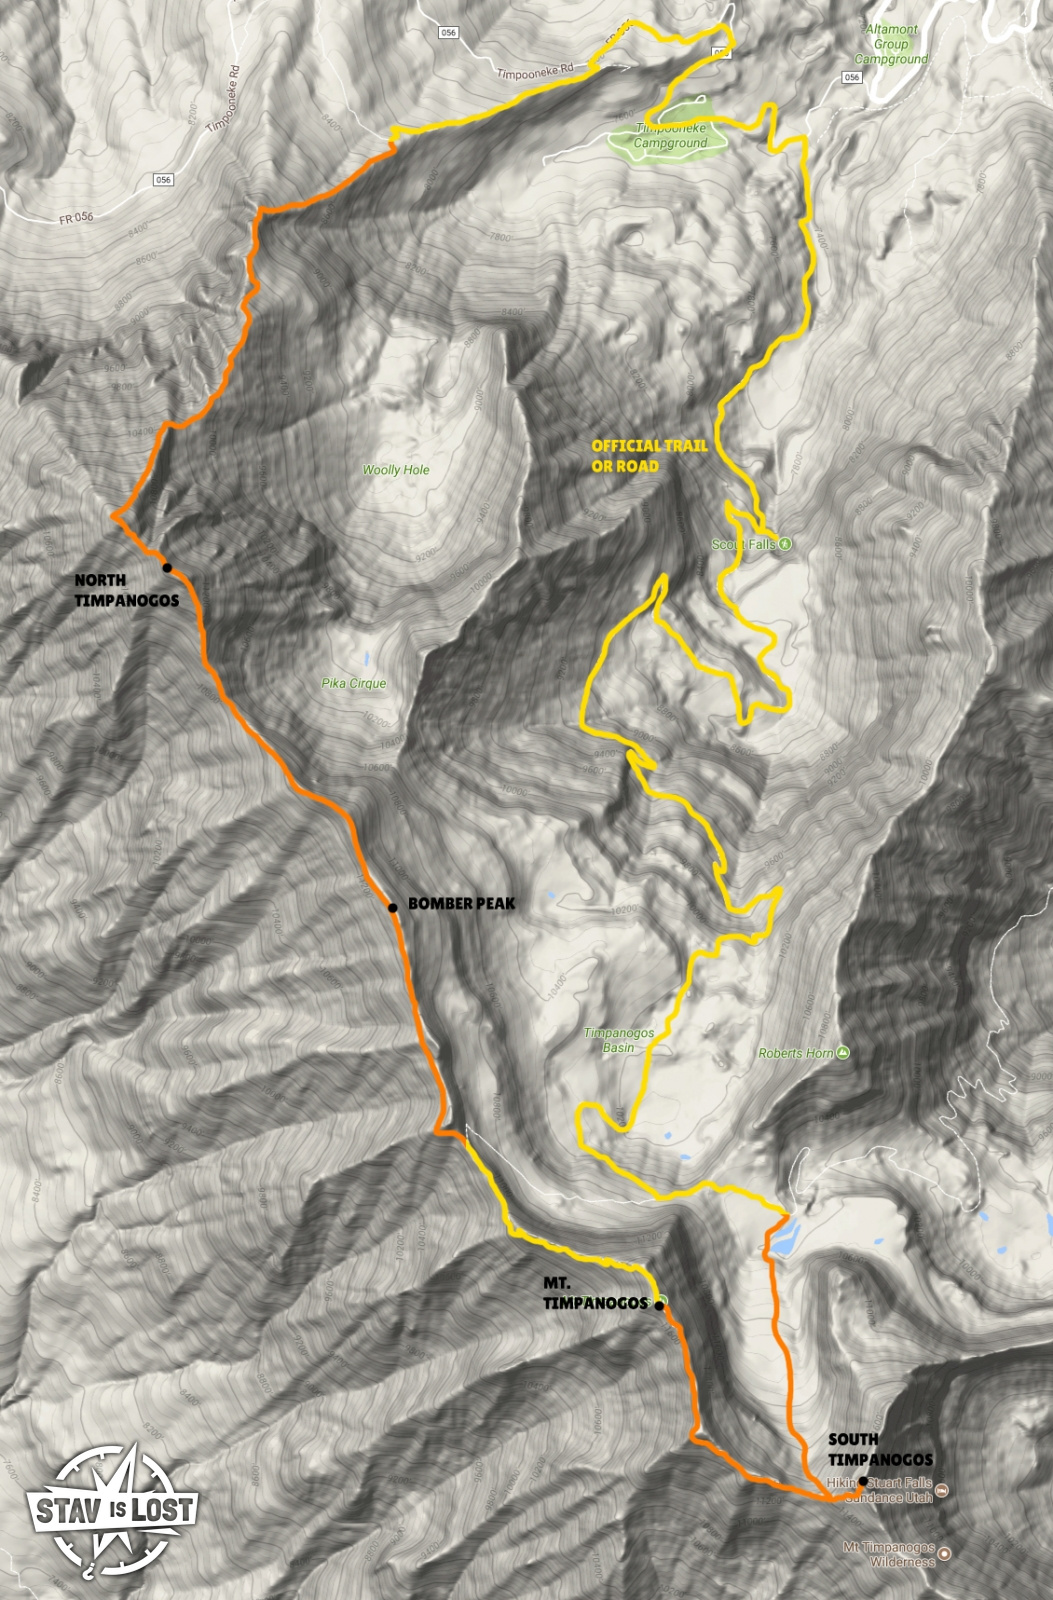 map for North to South Mount Timpanogos Traverse and Emerald Lake Loop by stav is lost